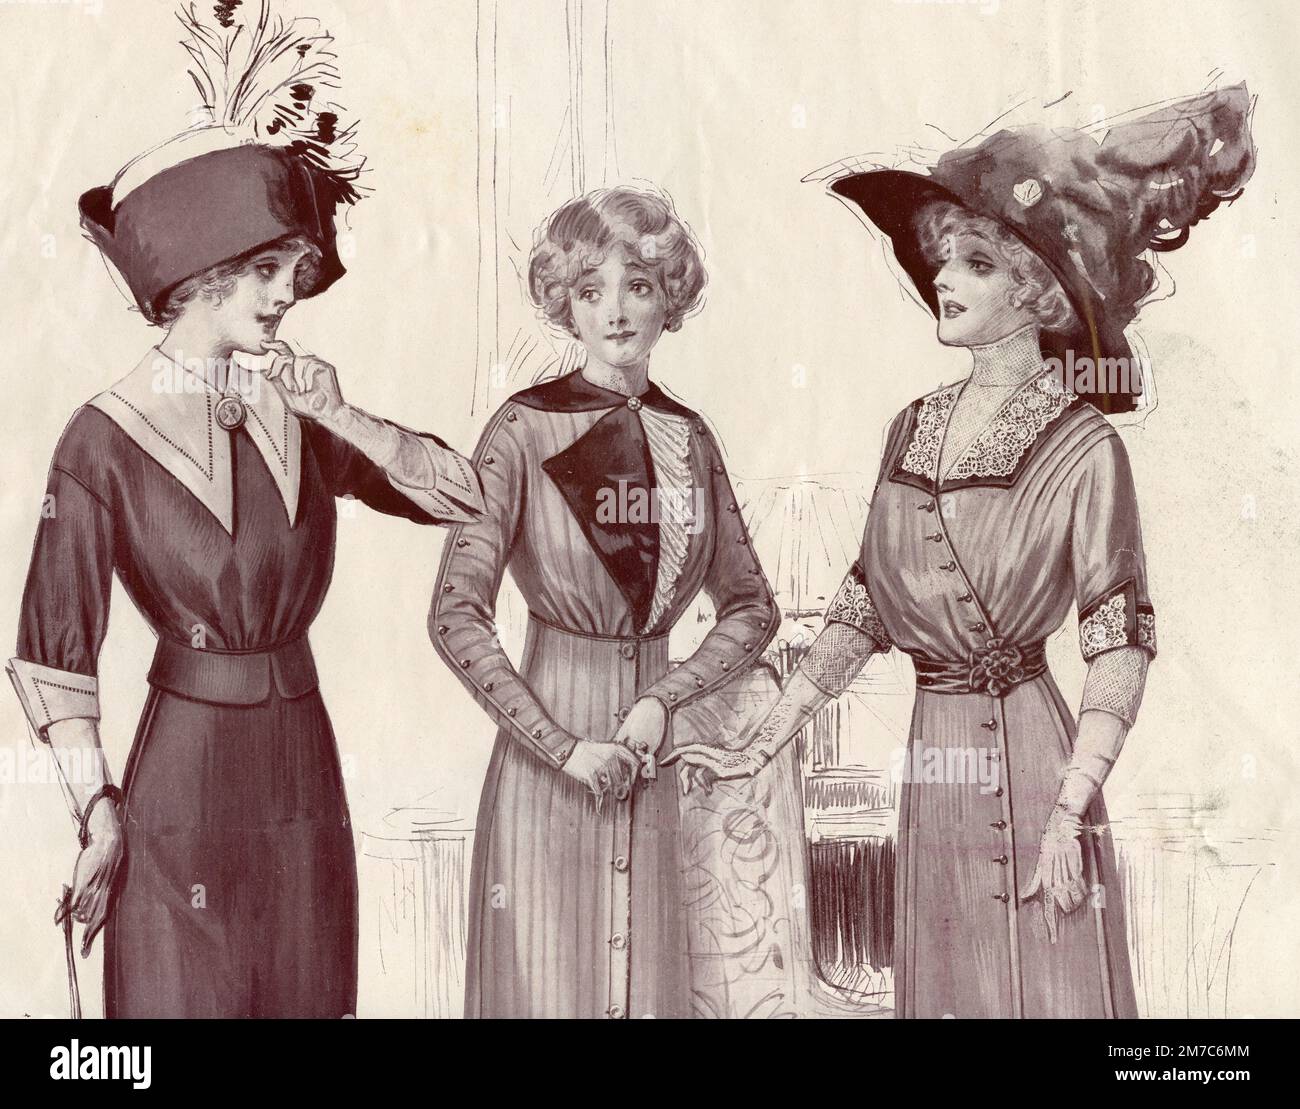 Illustration of women clothes fashion and style from vintage magazine, Italy 1910s Stock Photo